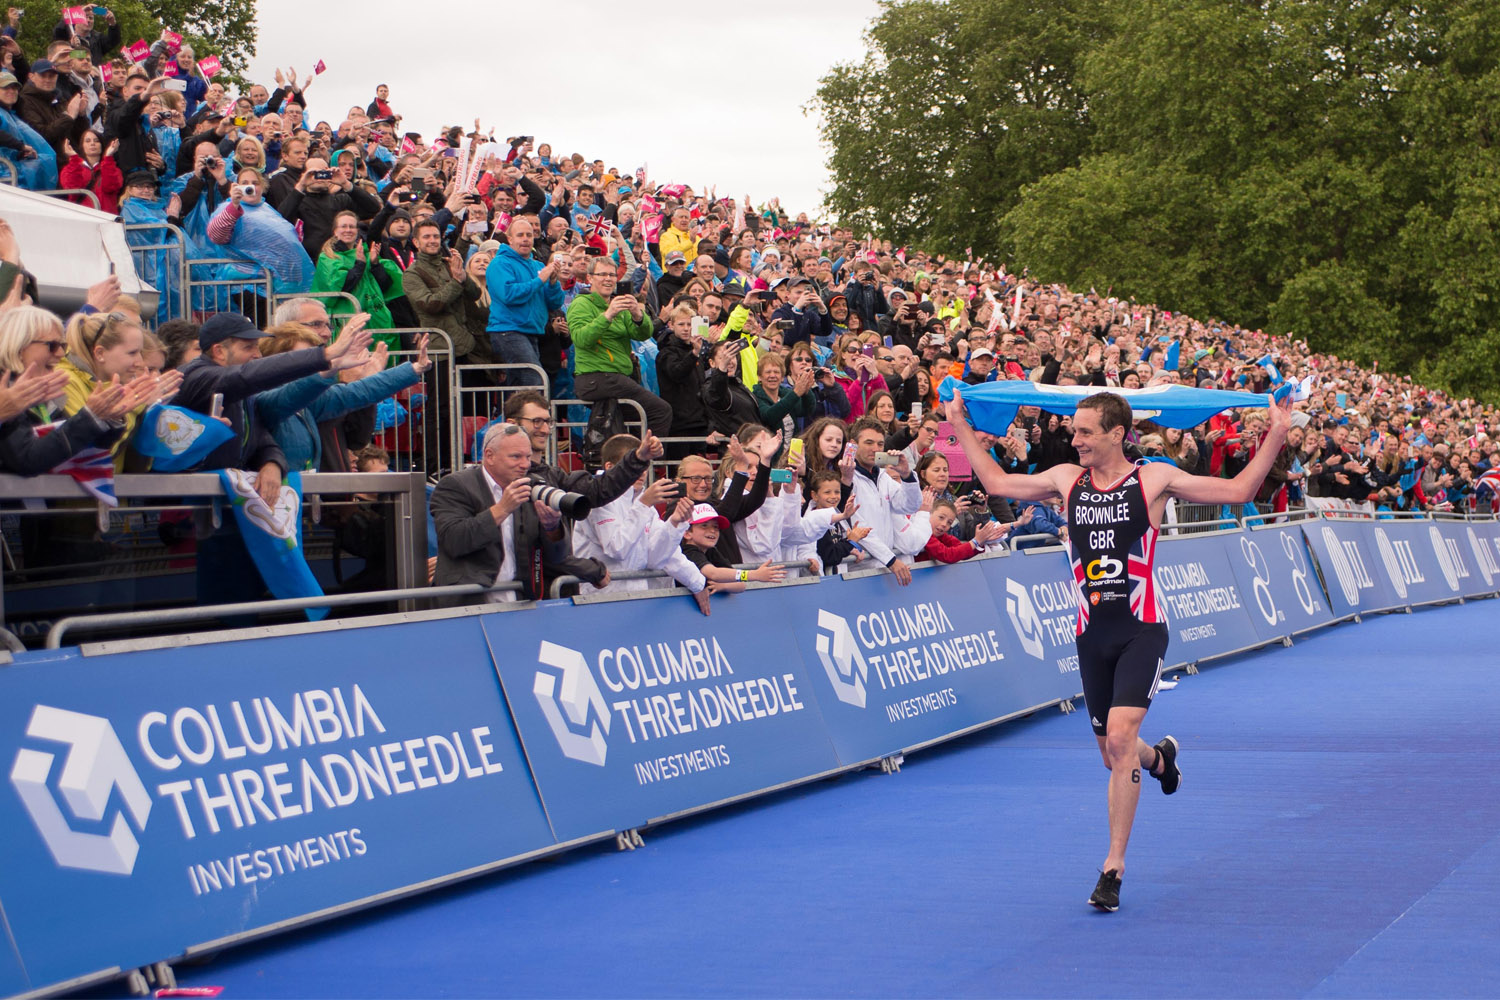 Vitality World Triathlon London news • rb create • London-based photographic and film agency, specialising in sports, sponsorship, advertising and live events